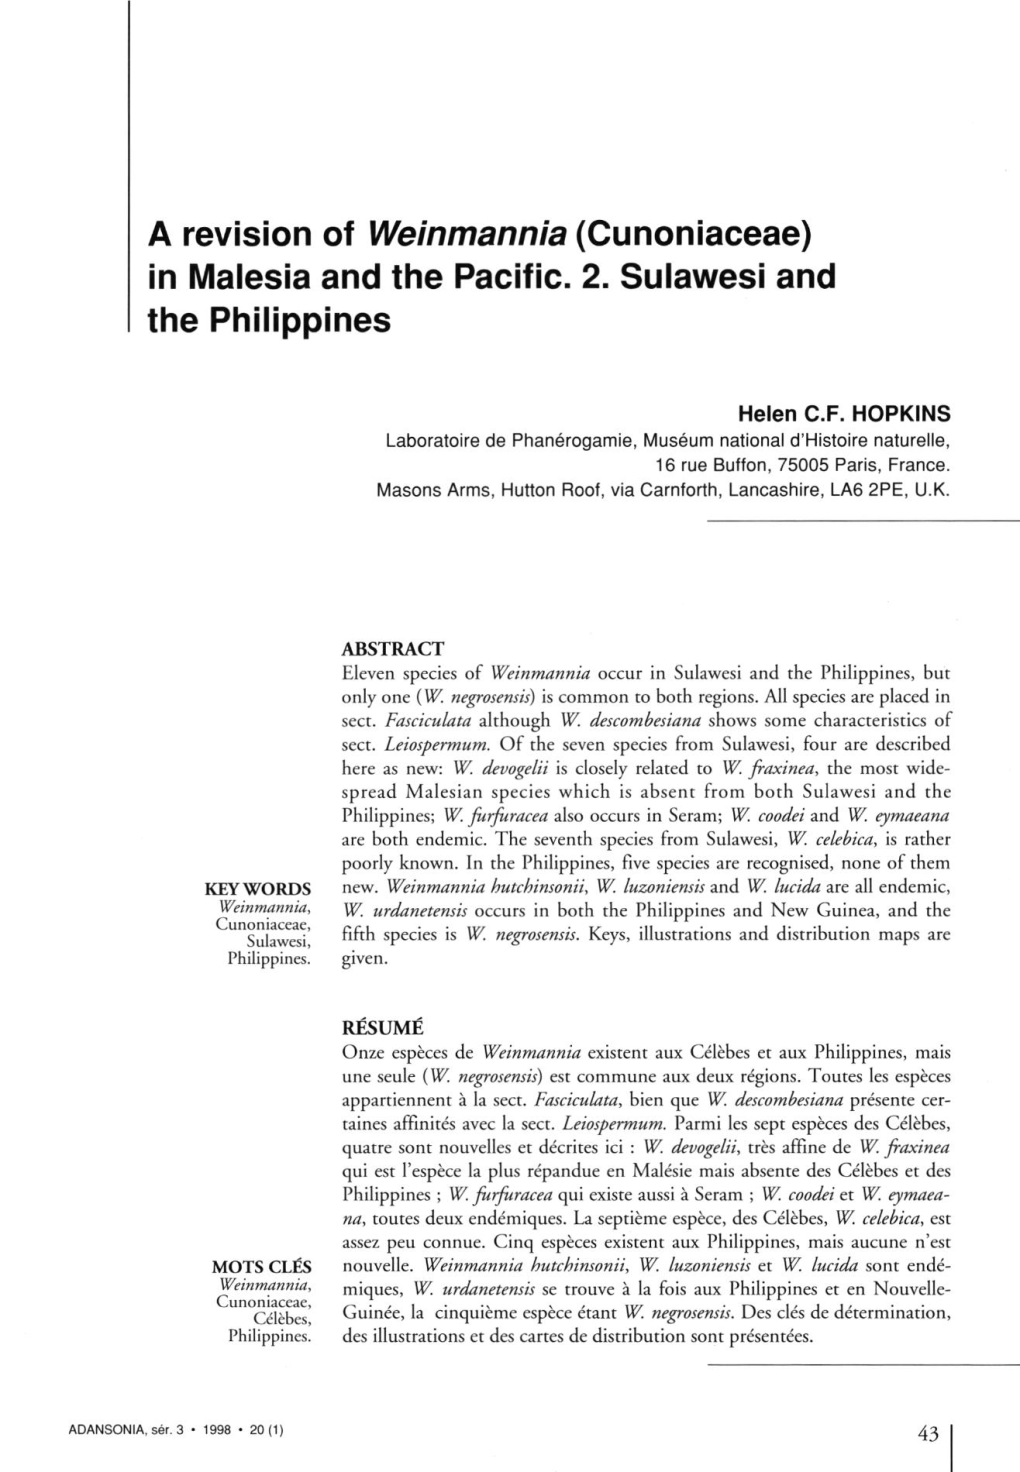 A Revision of Weinmannia (Cunoniaceae) in Malesia and the Pacific